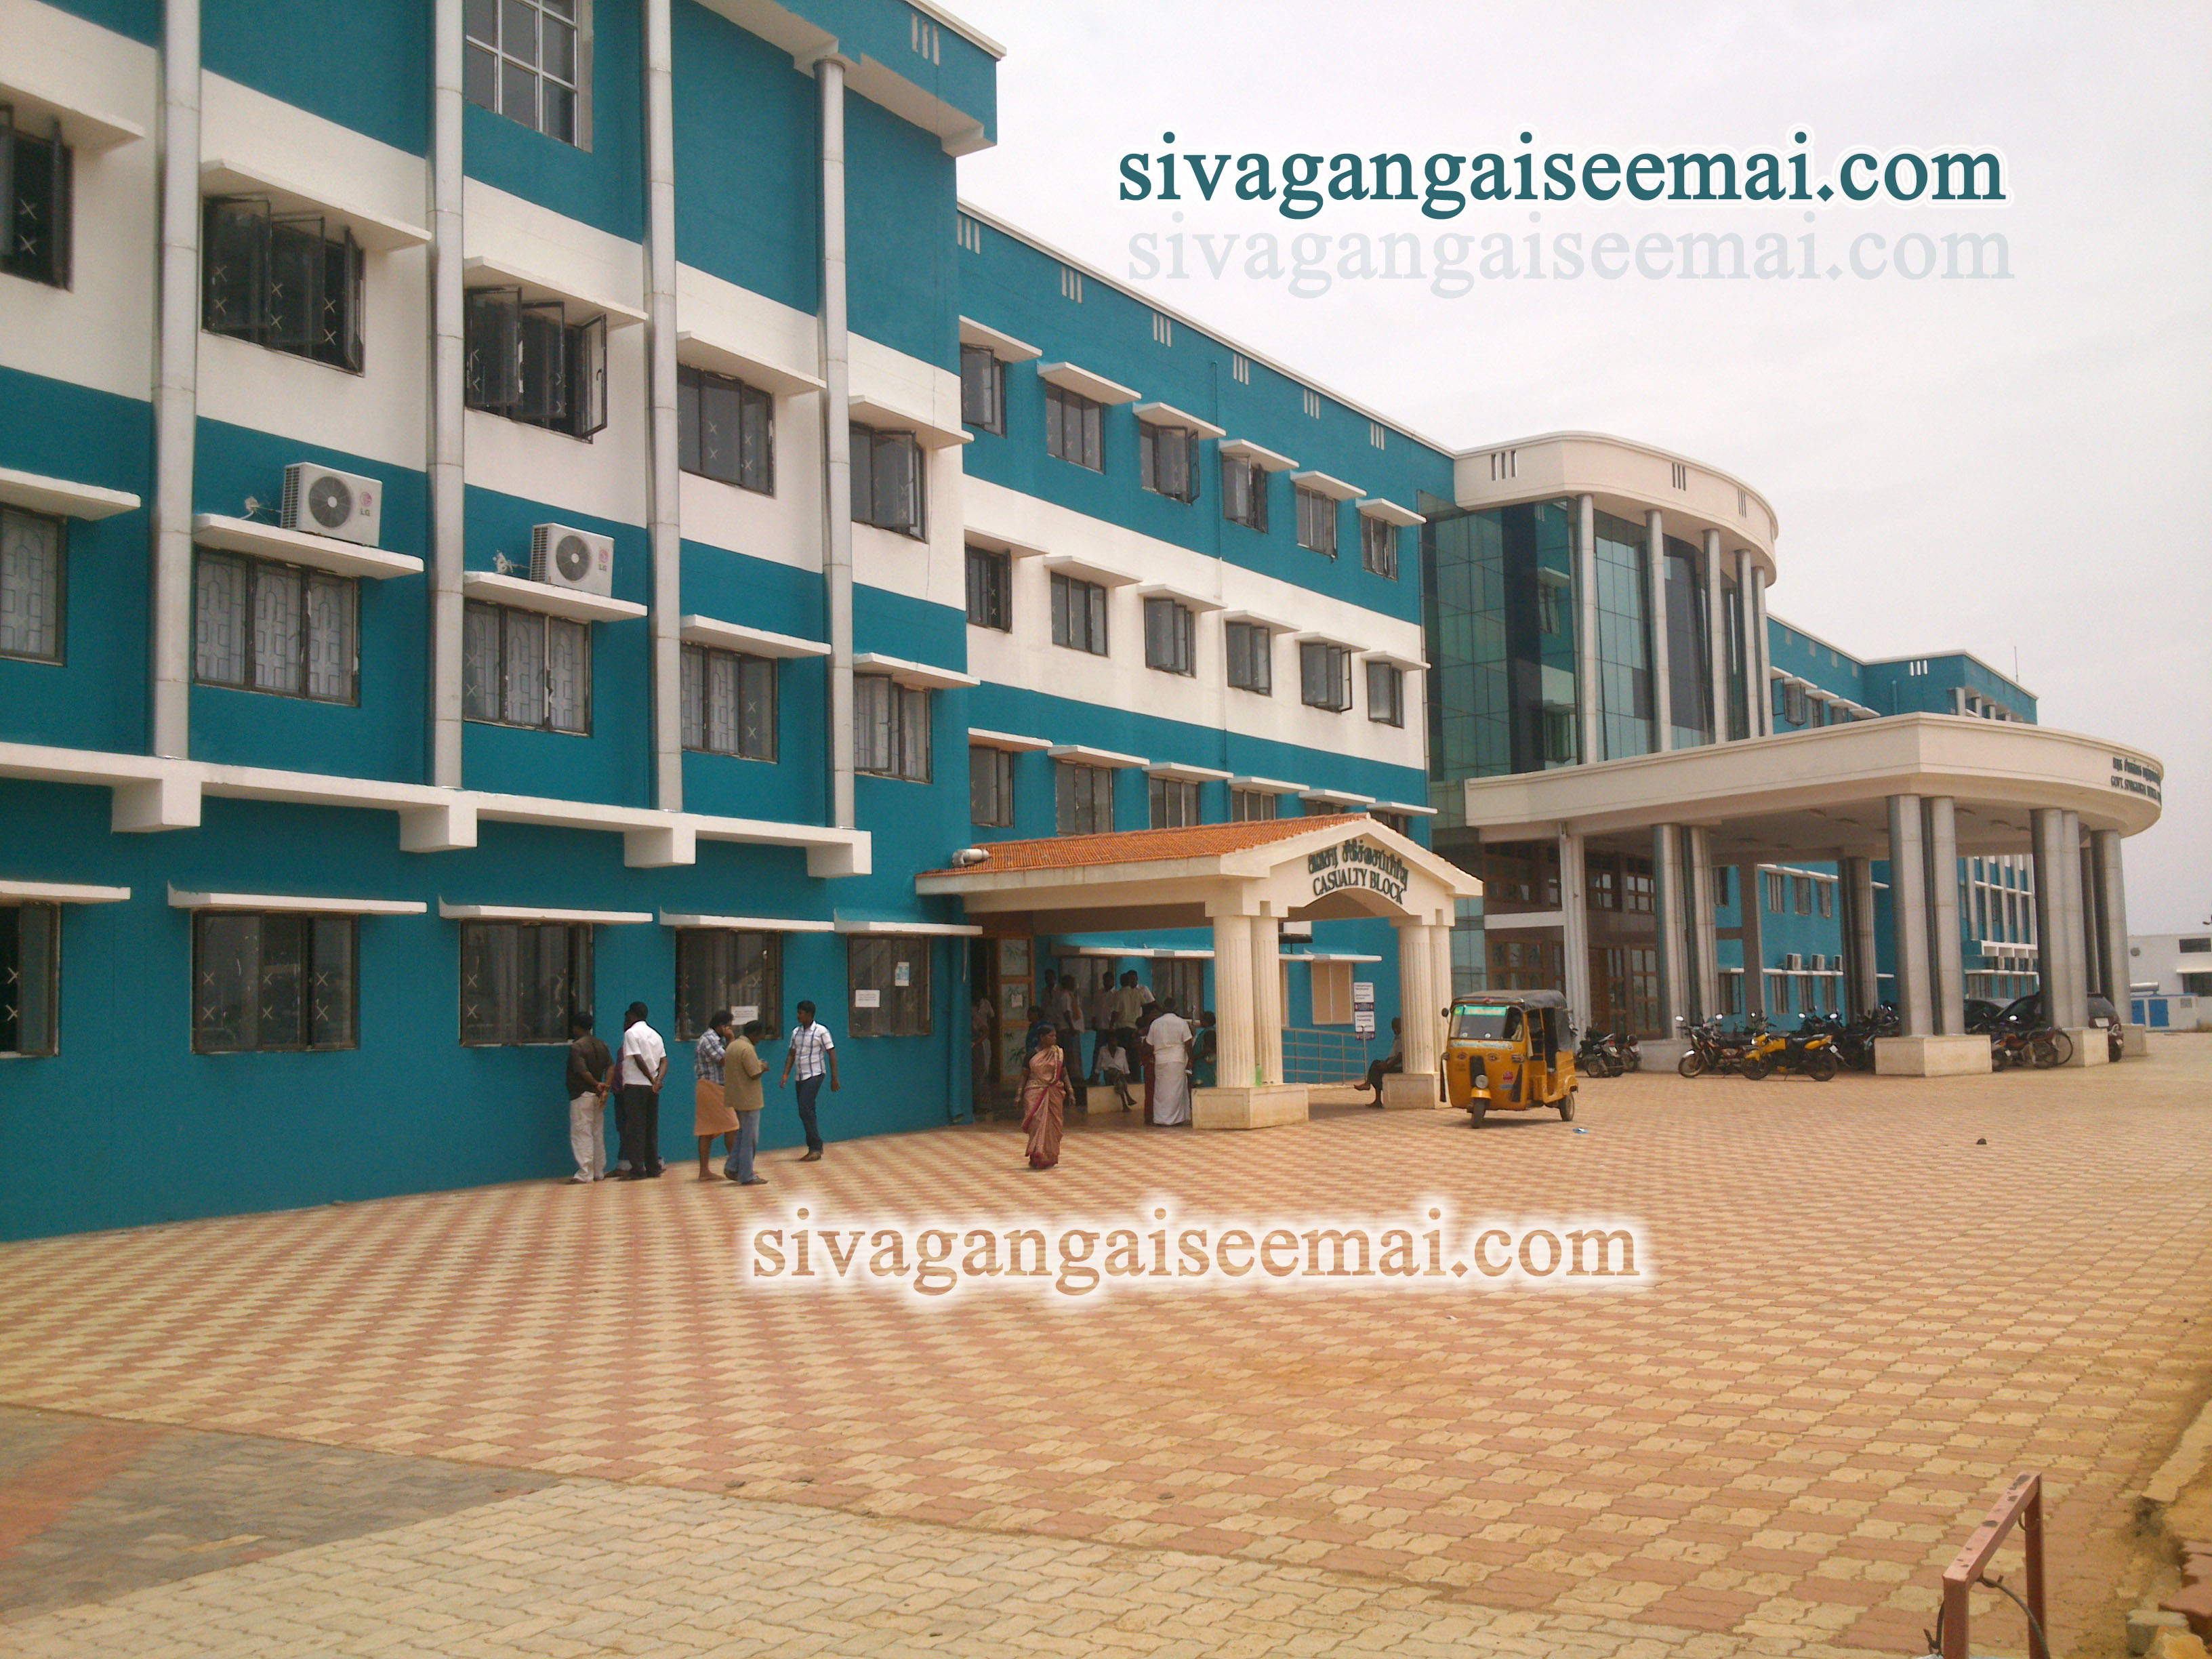 newly constructed sivagangai medical college